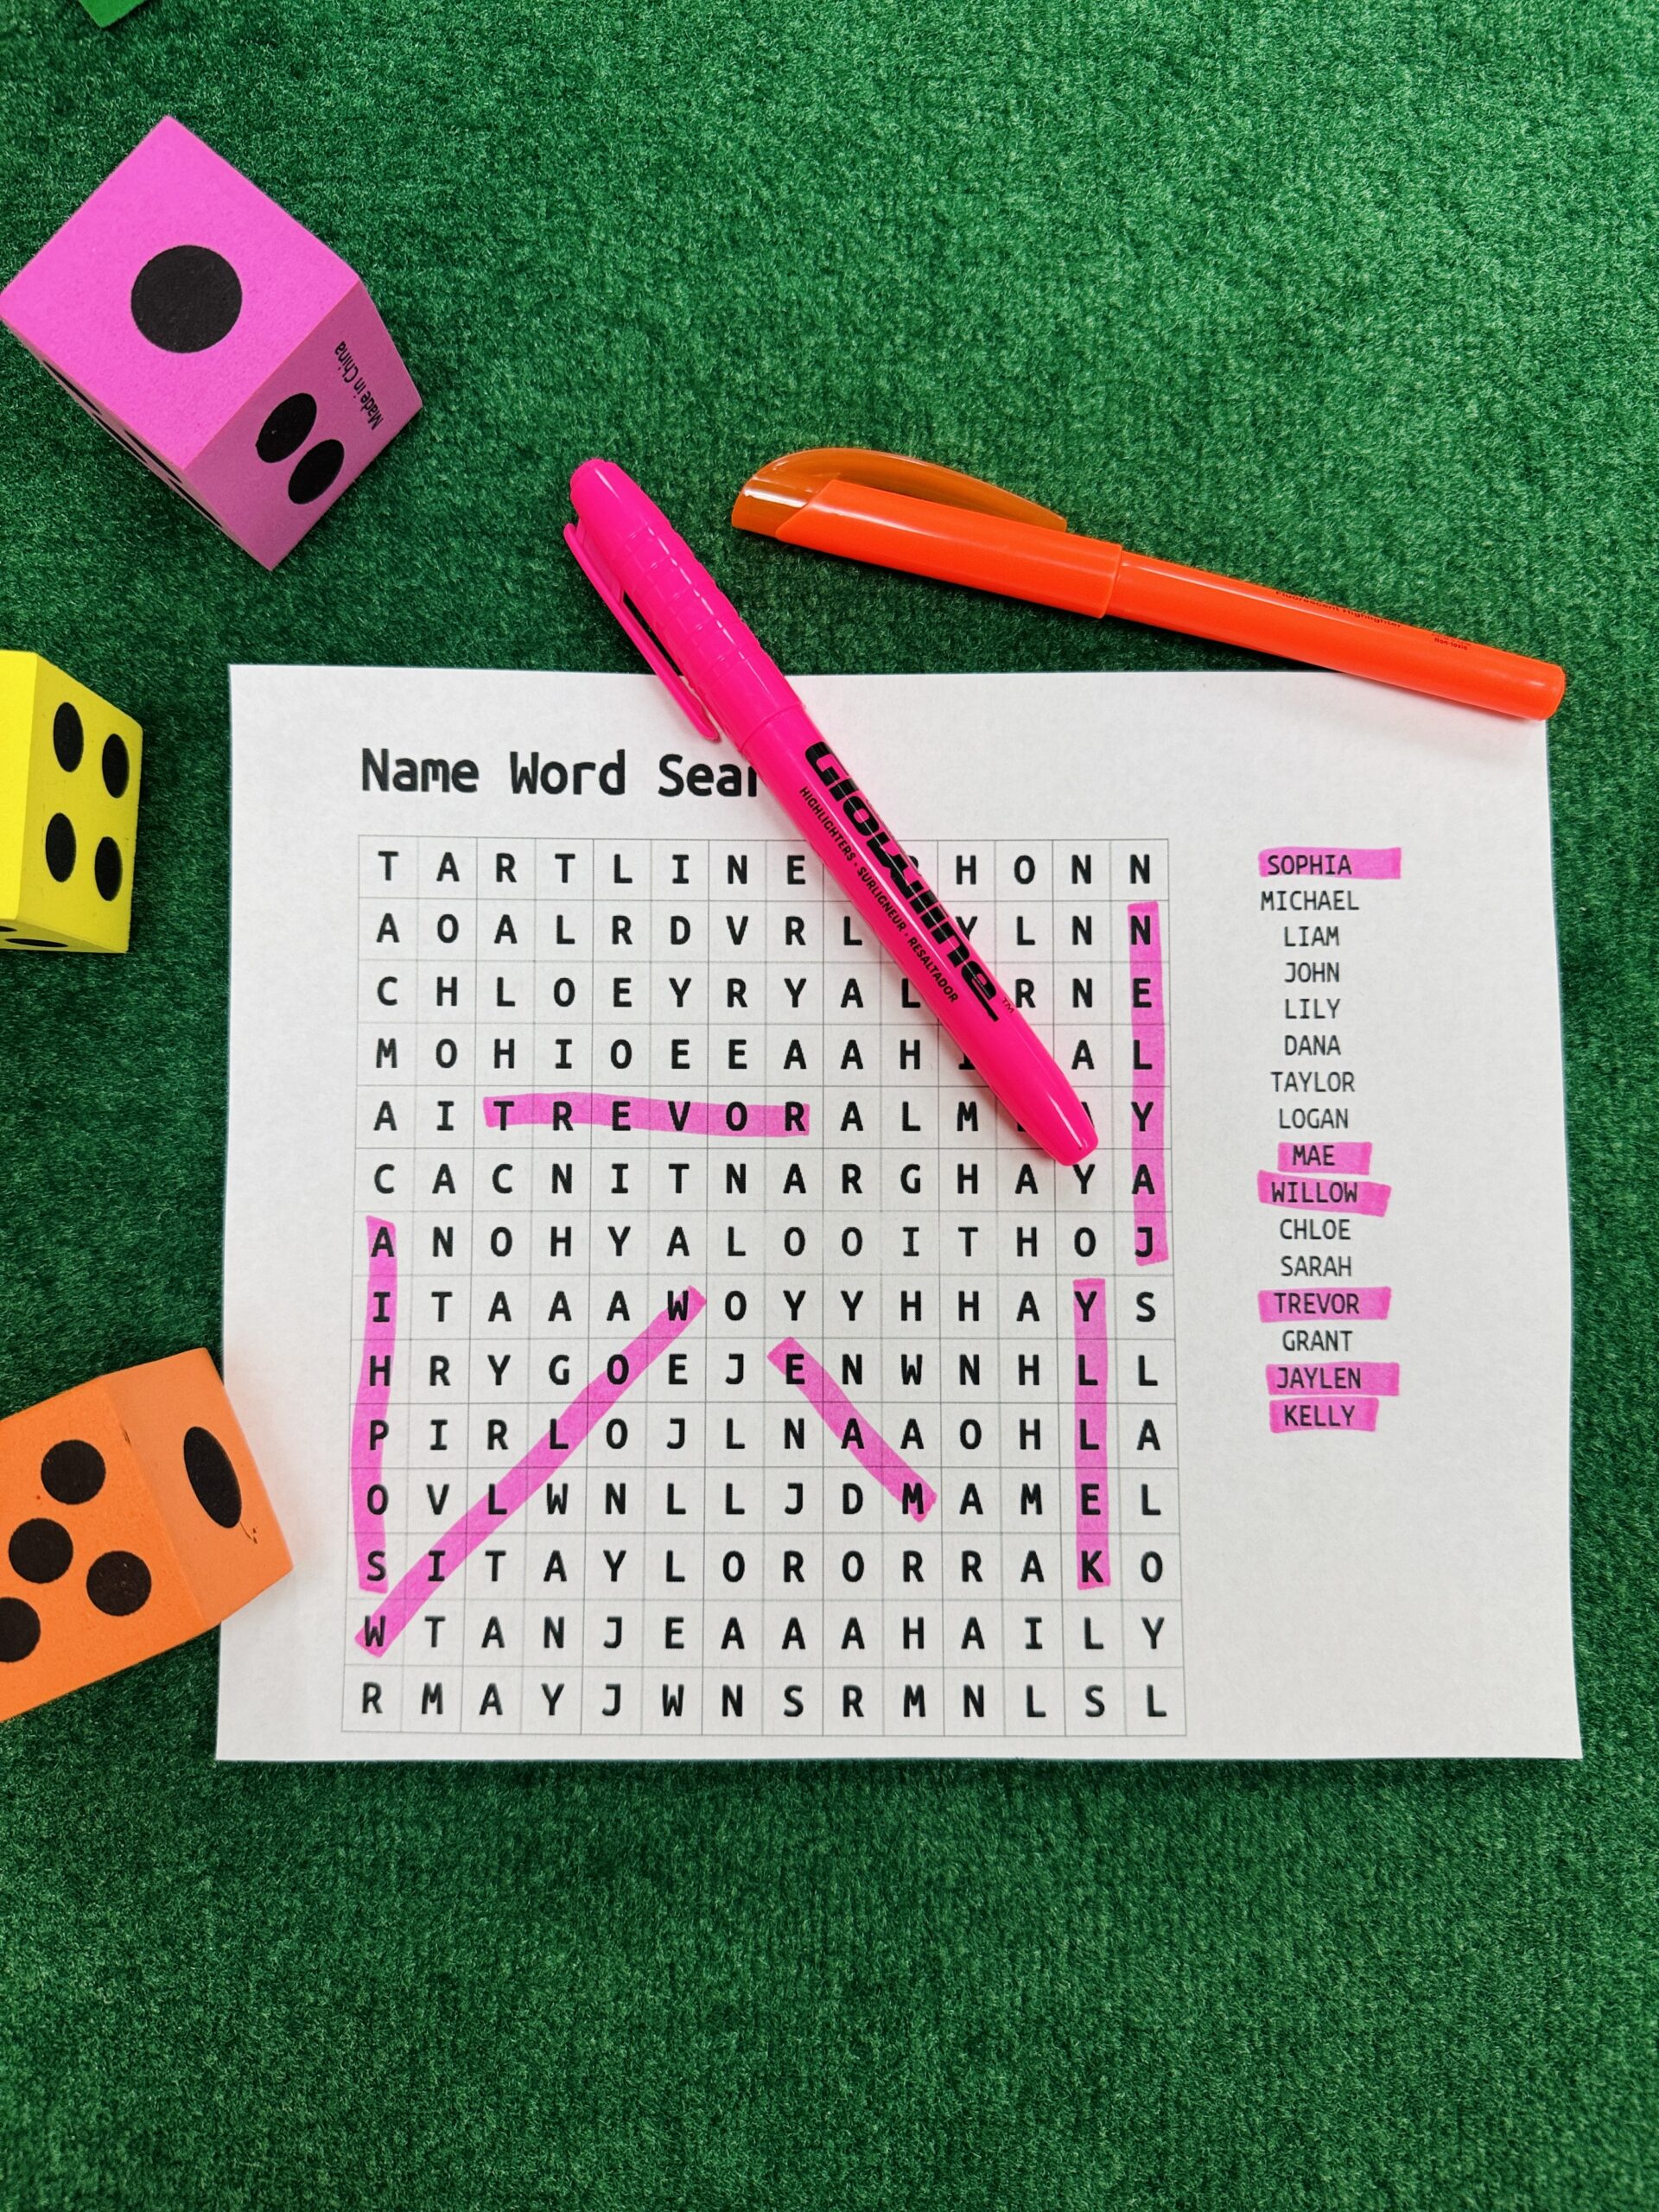 Name Word Search